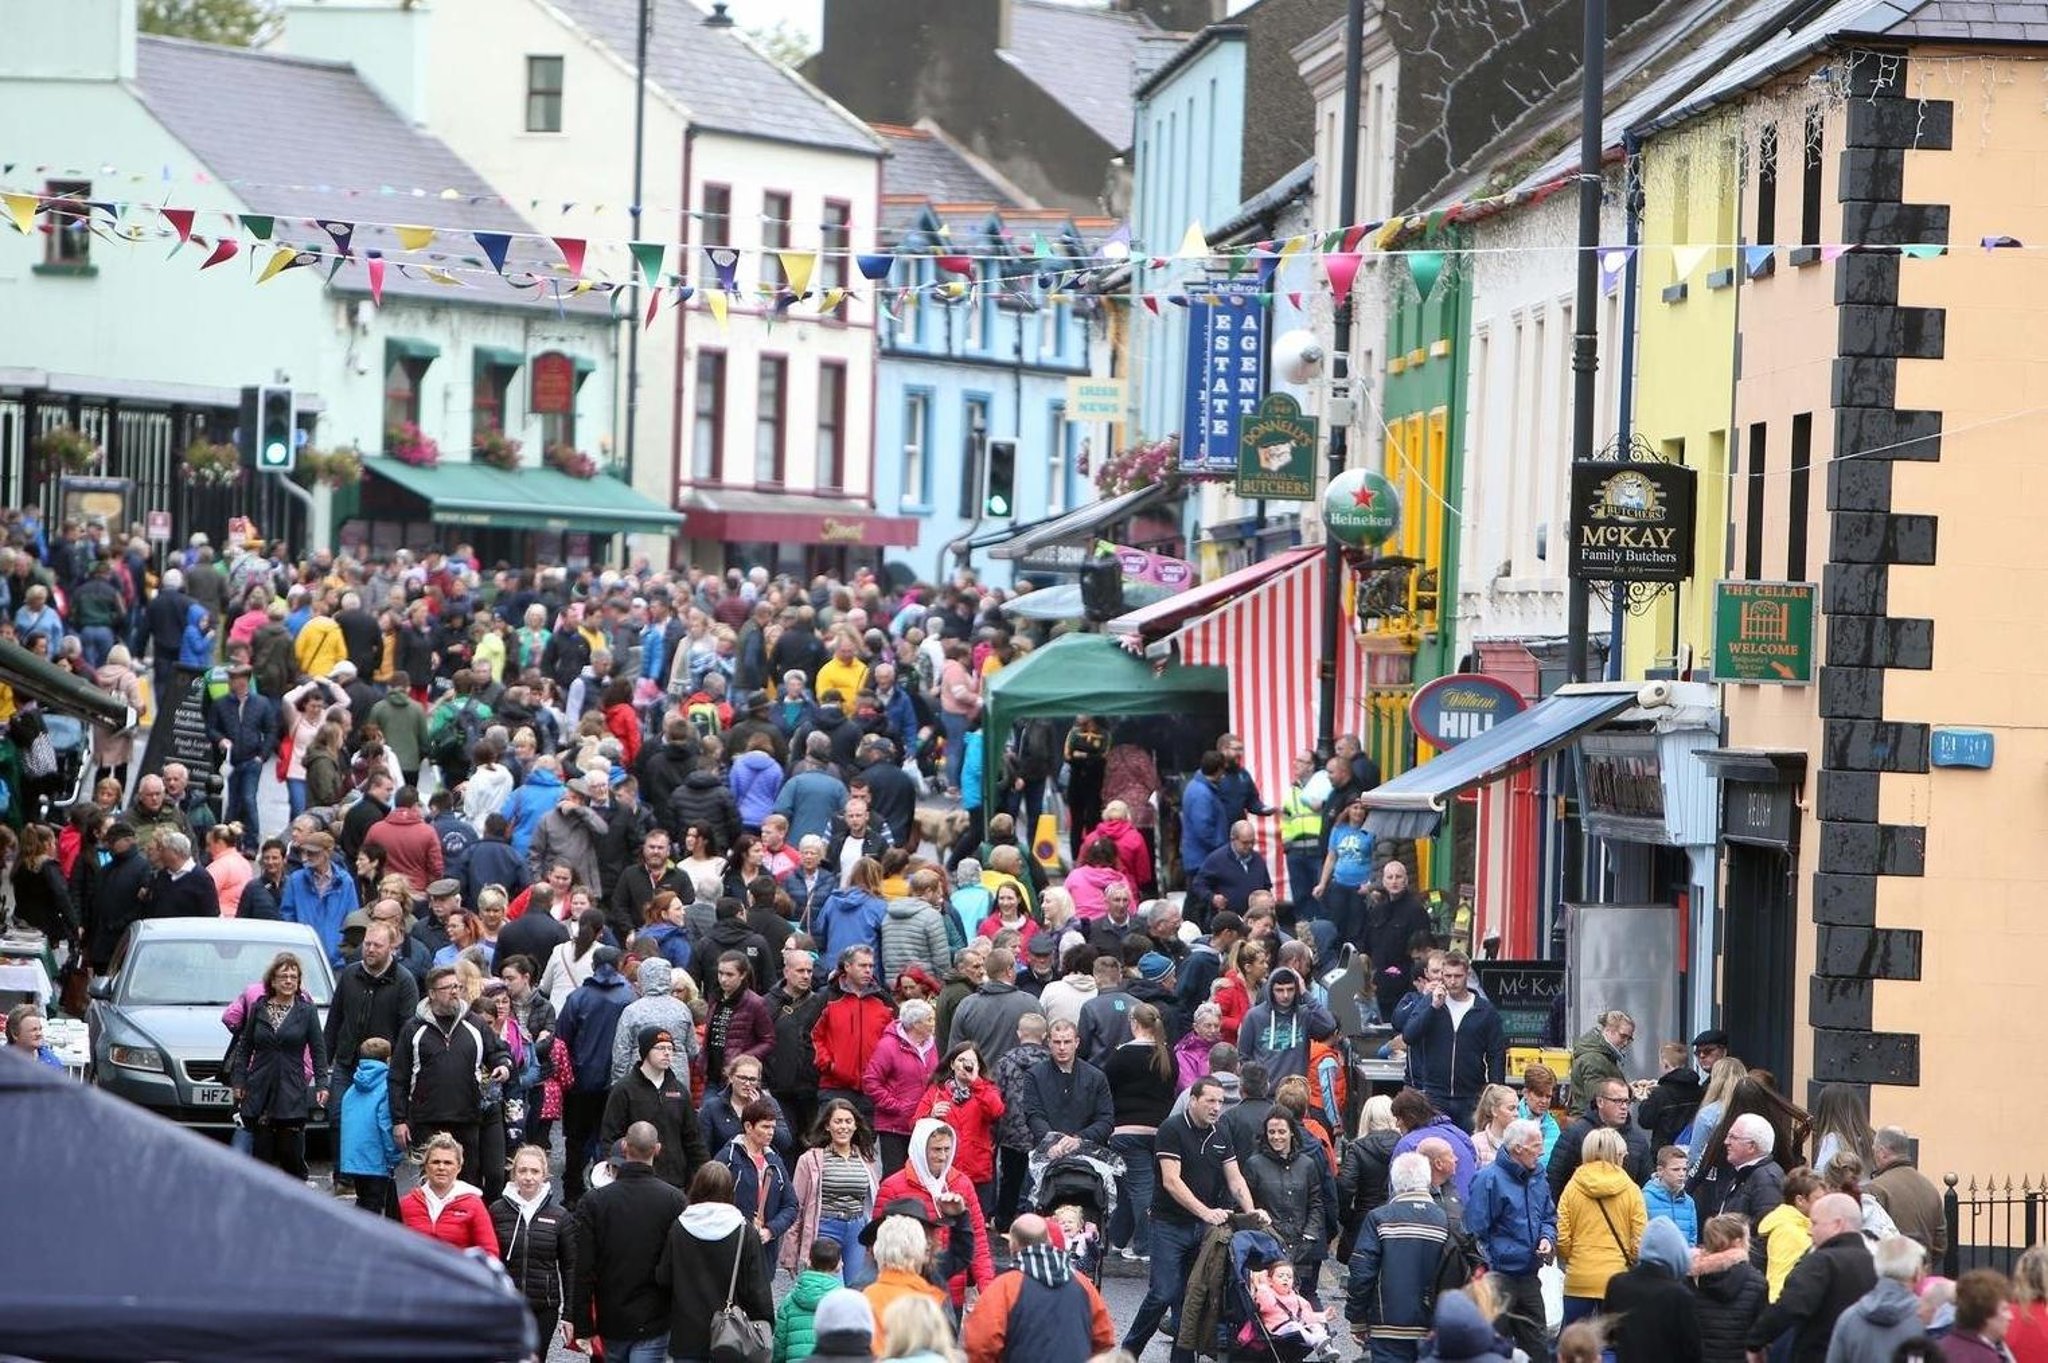 Ould Lammas Fair to return this year in Ballycastle after two years absence